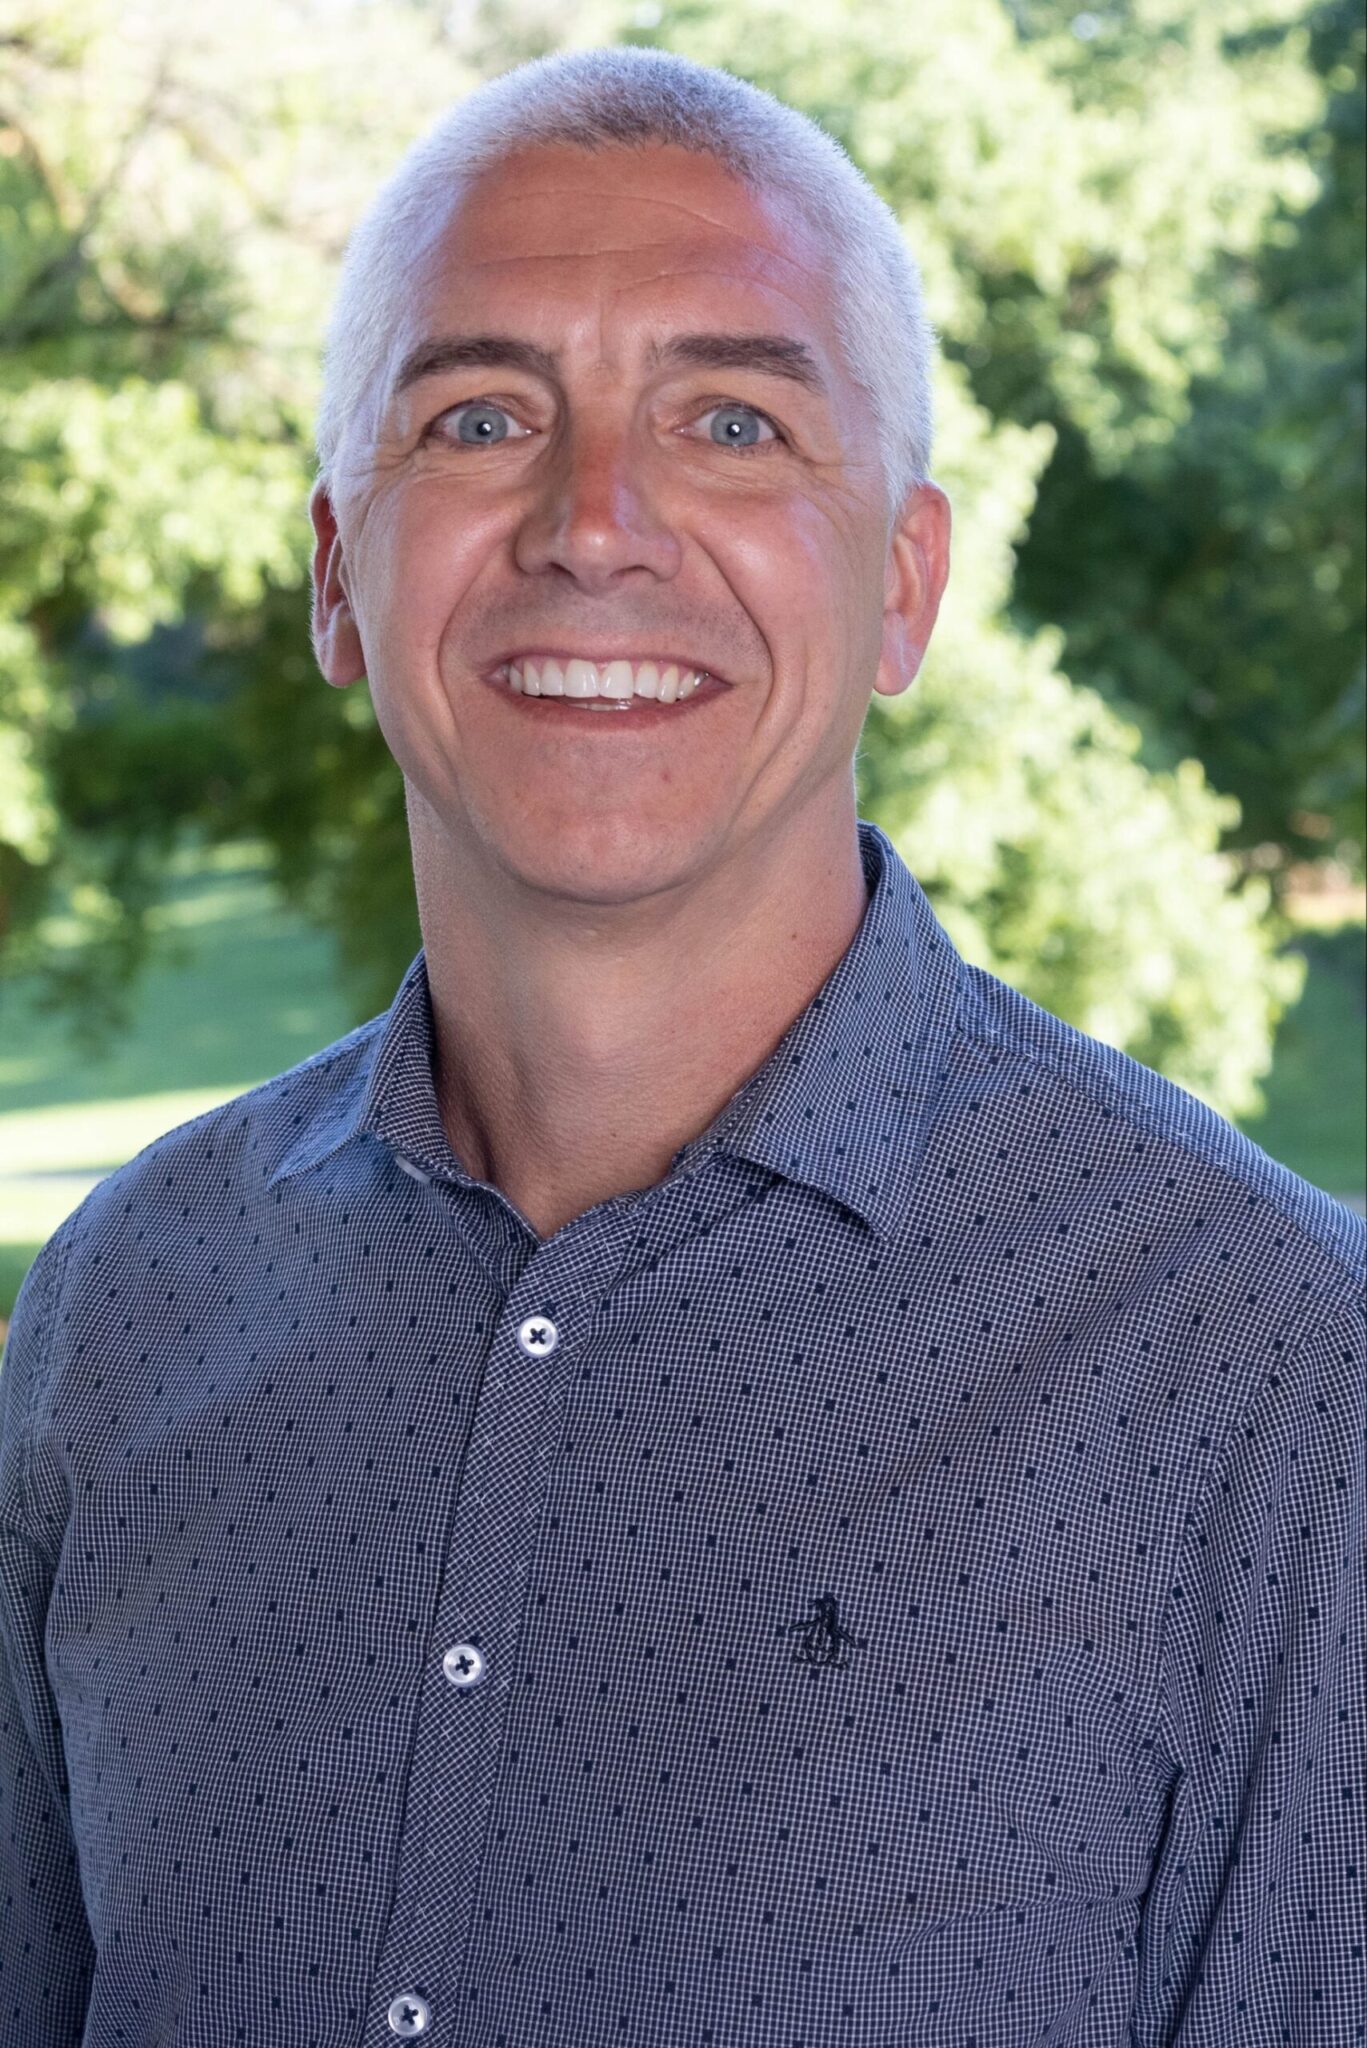 Professional headshot of a bald, white man smiling against a green tree backdrop, wearing a blue collared button up shirt; Name: Josh Christianson, PEAT